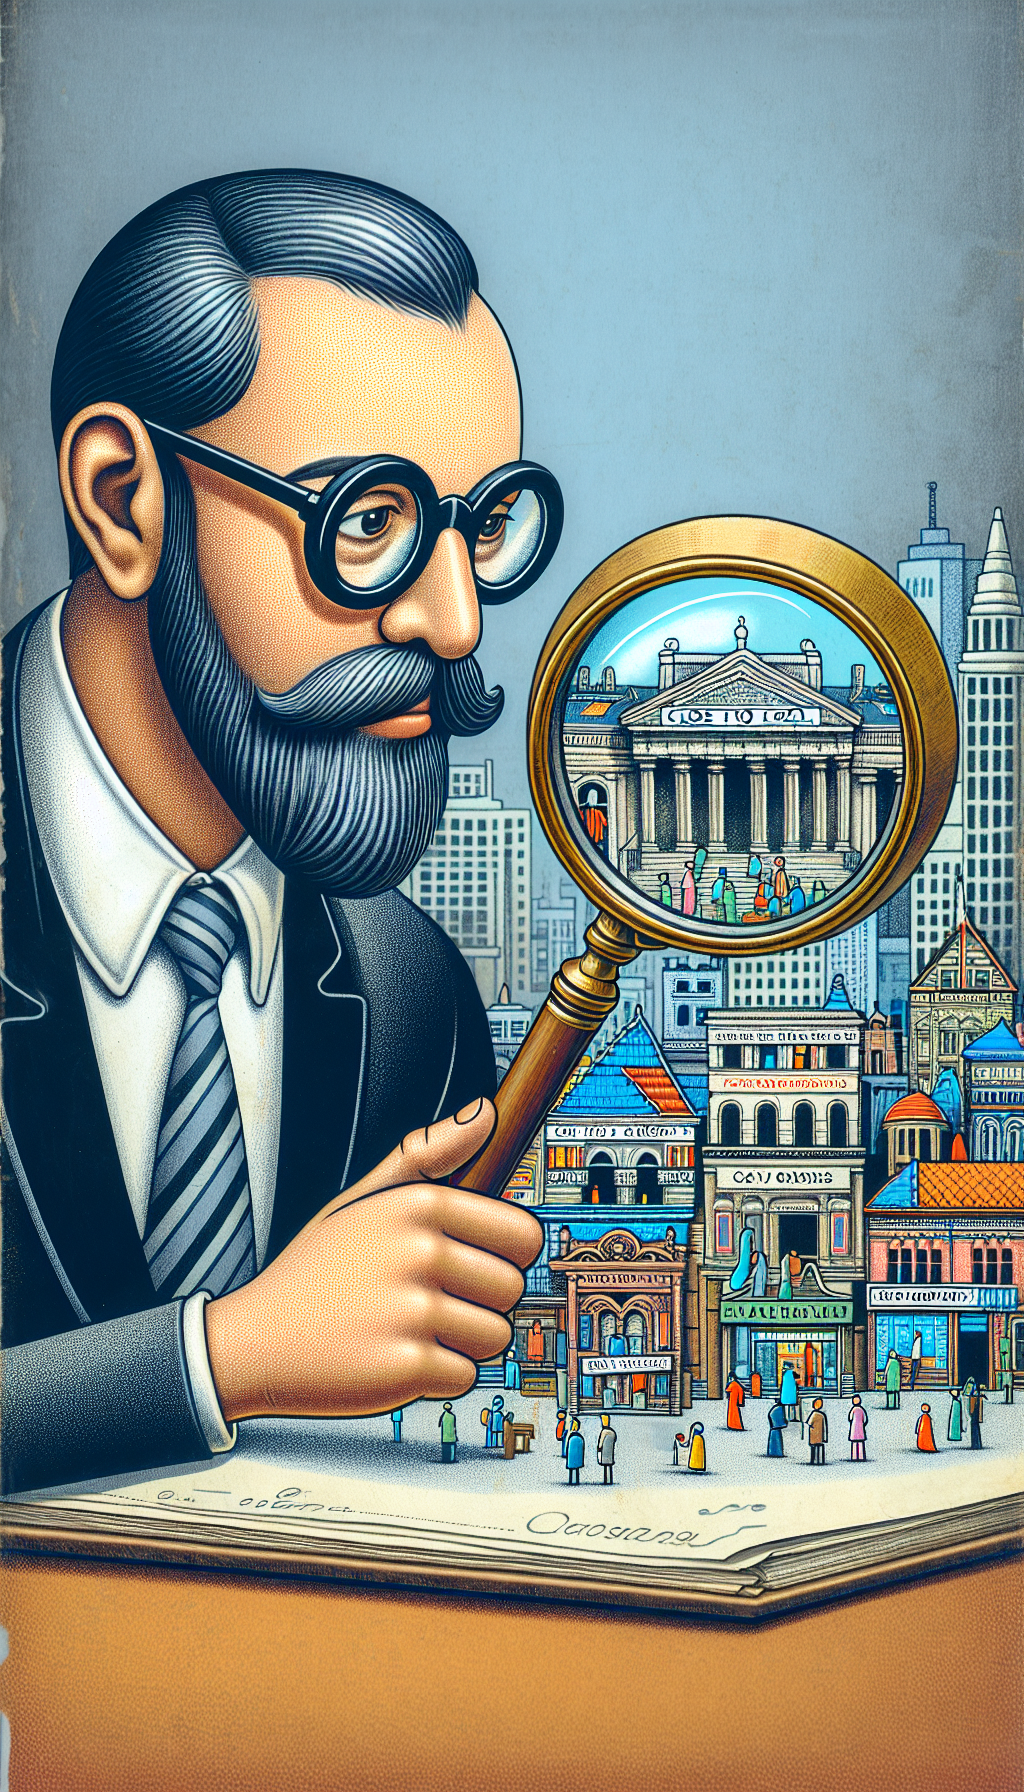 An expert appraiser gazes through a magnifying glass, which cleverly frames a vibrant, detailed miniature of a local cityscape, featuring prominent art galleries and appraisal offices dotting the streets. The magnified view symbolizes the in-depth analysis, while the city backdrop ensures the 'close to home' theme, using a patchwork of artistic styles from impressionist to modern within the cityscape to represent diverse art forms.